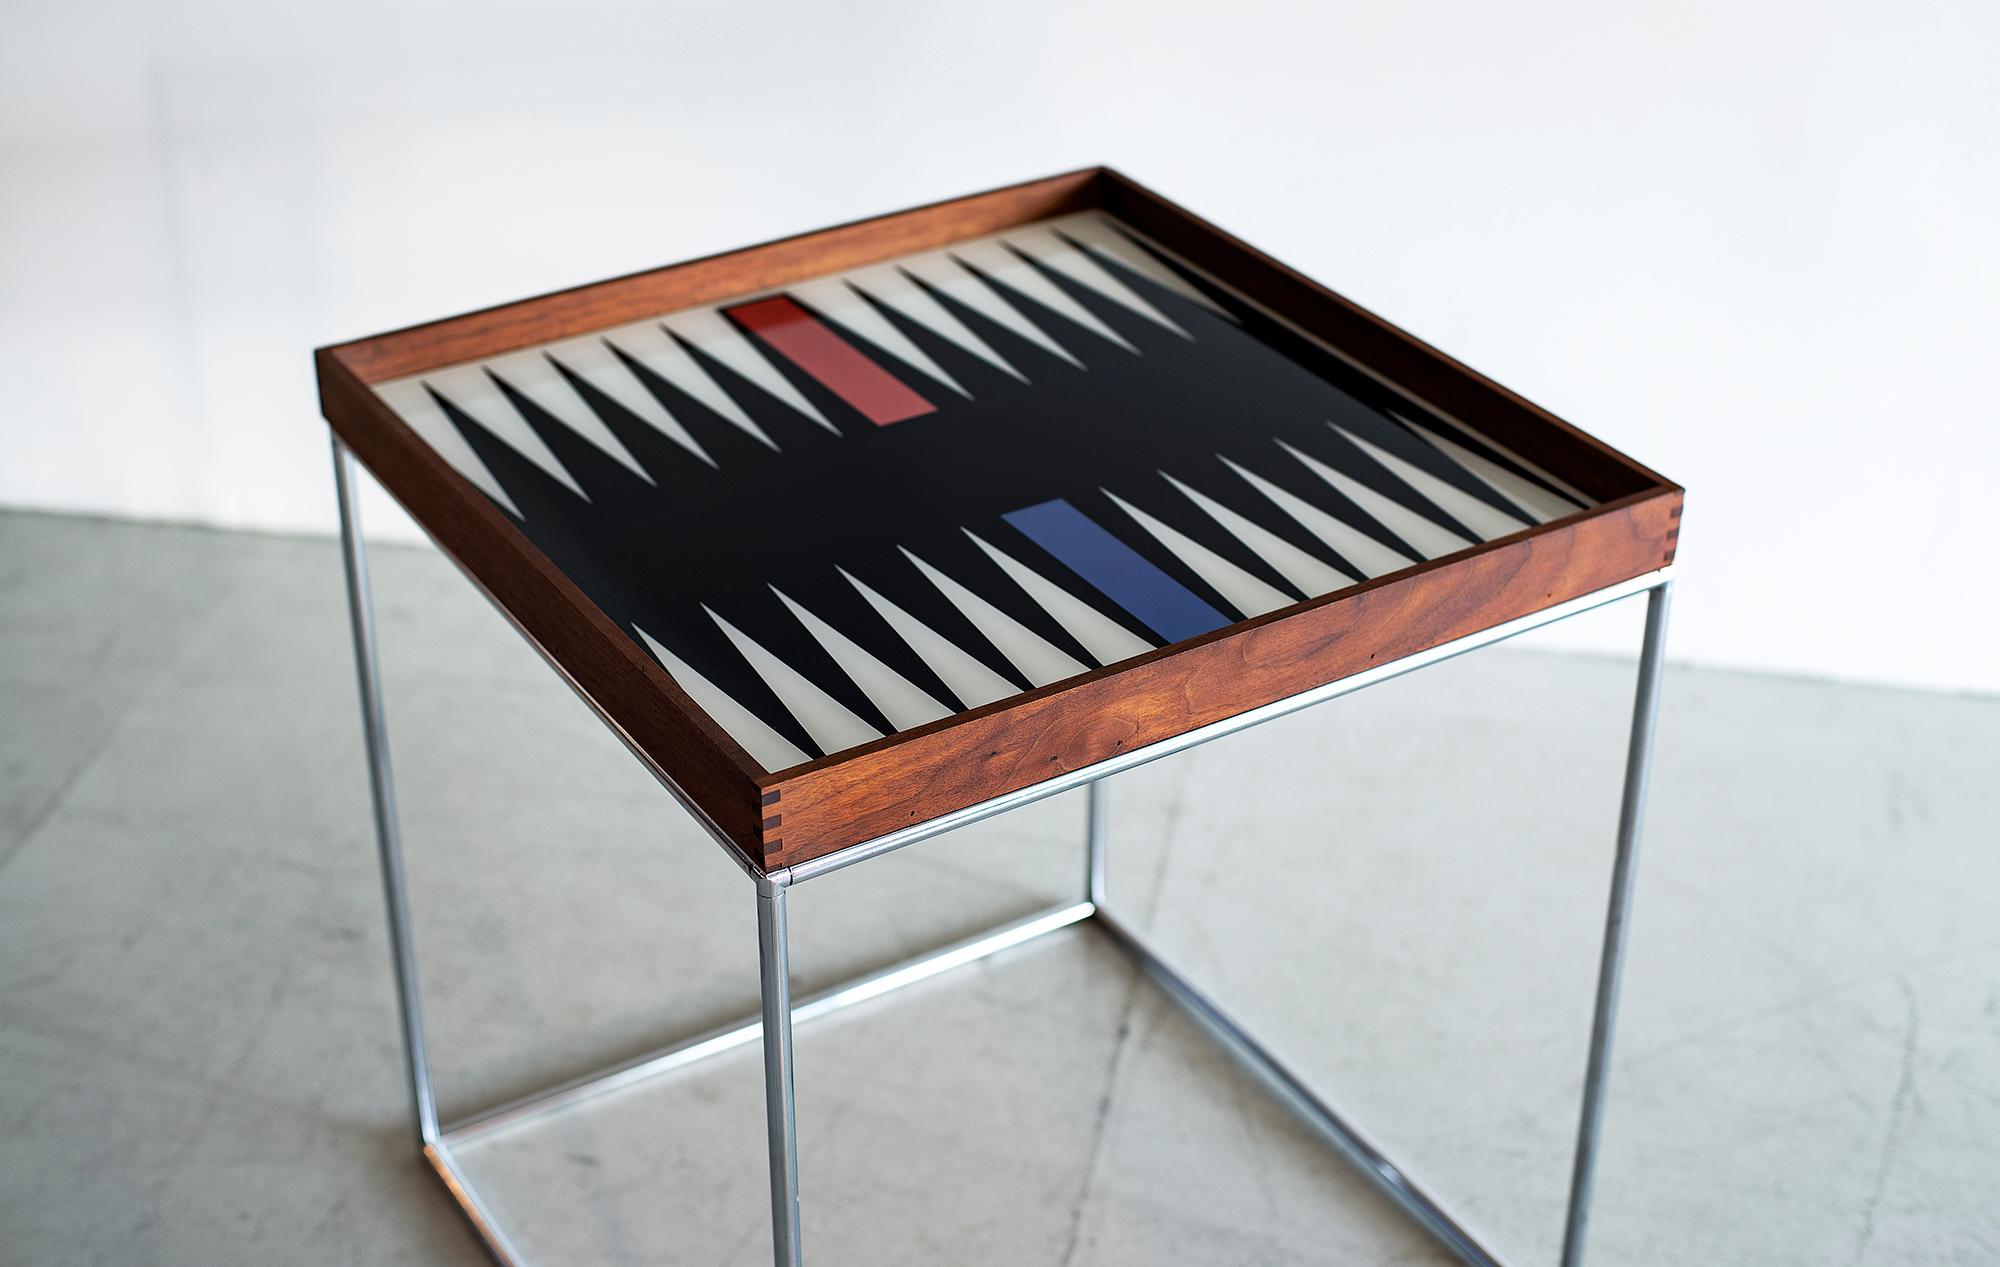 1970s modern custom backgammon table by Austin cox enterprises.
Teak table frame with custom glass game board on metal cube frame.
Dovetail corners show craftsmanship.
Great piece!
 